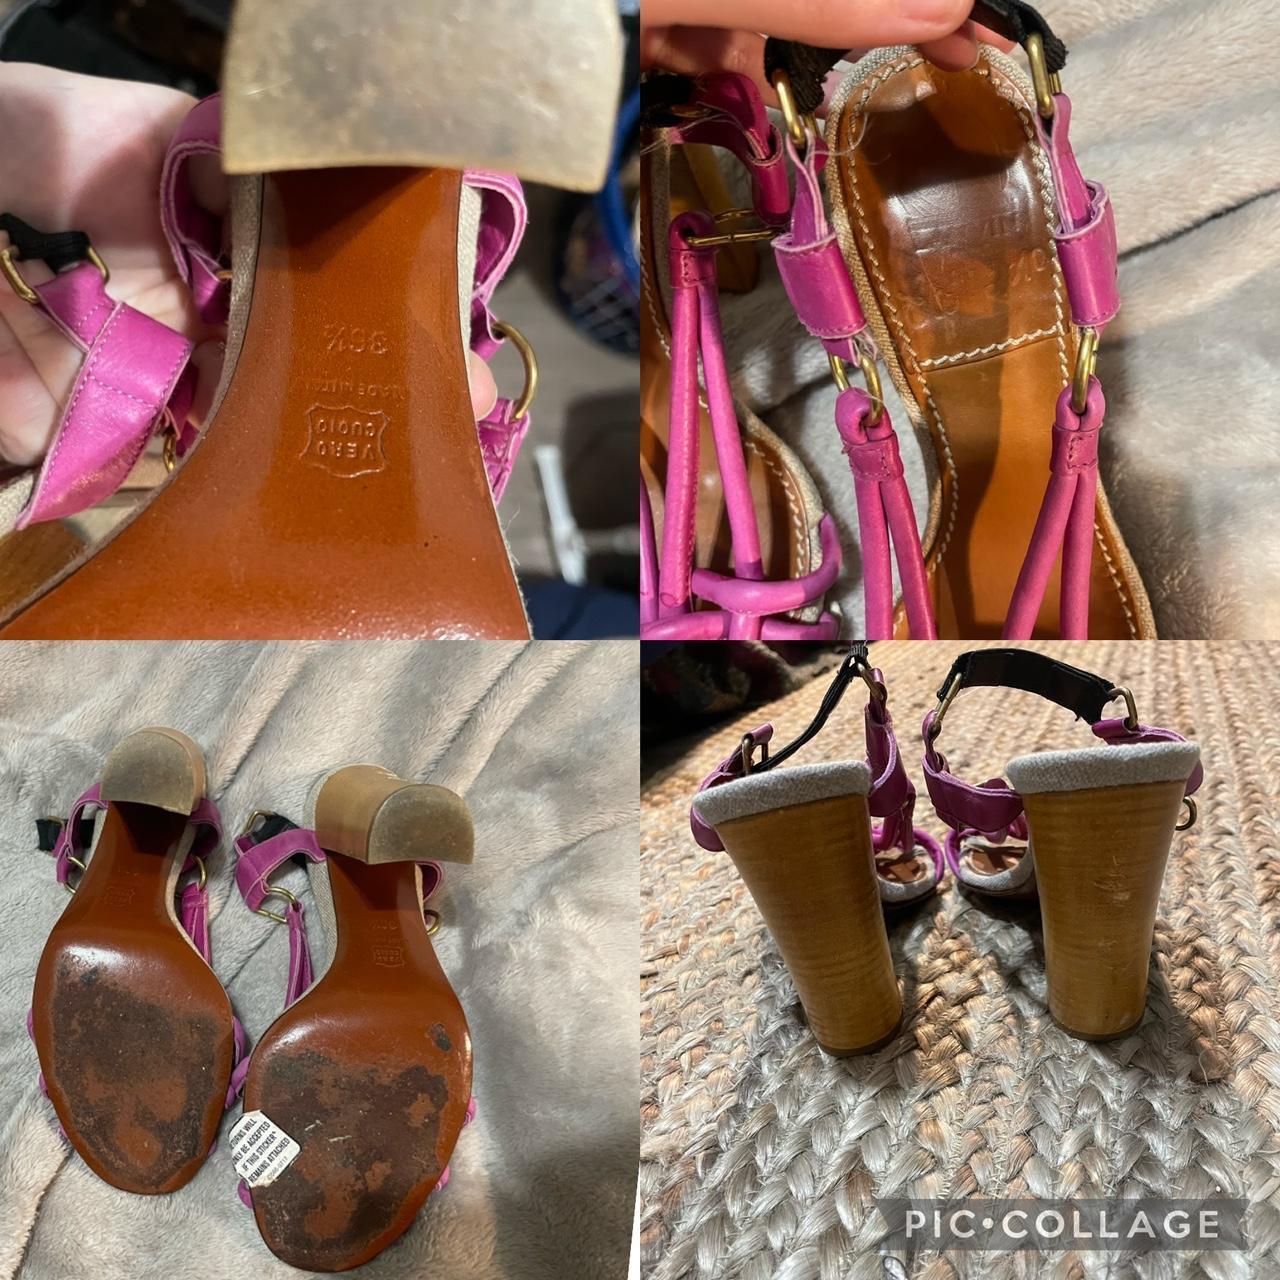 Lanvin Women's Pink and Tan Sandals (4)